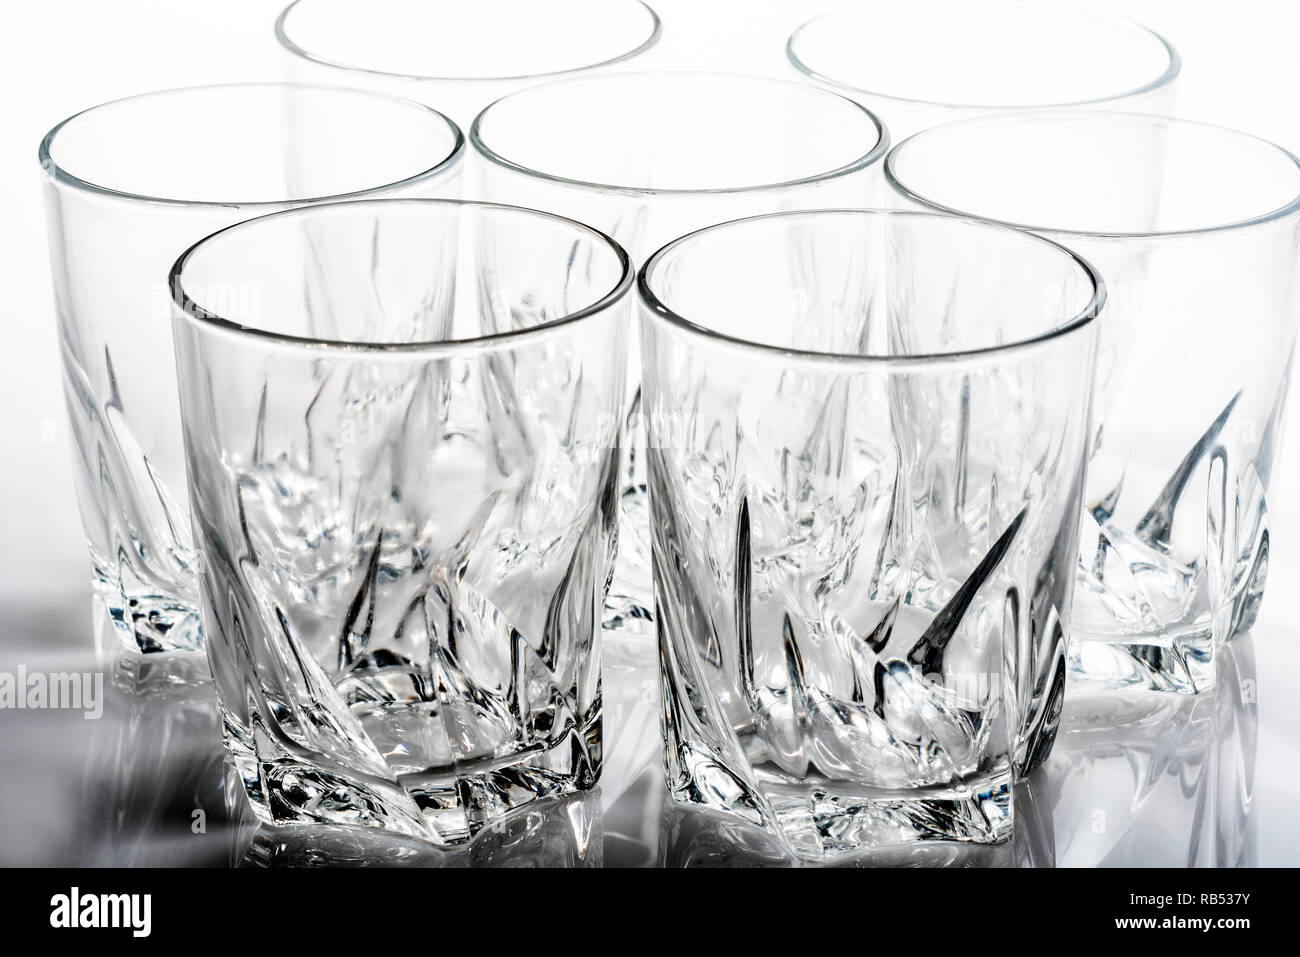 Group of glass tumblers with a heavy, chunky design. Stock Photo